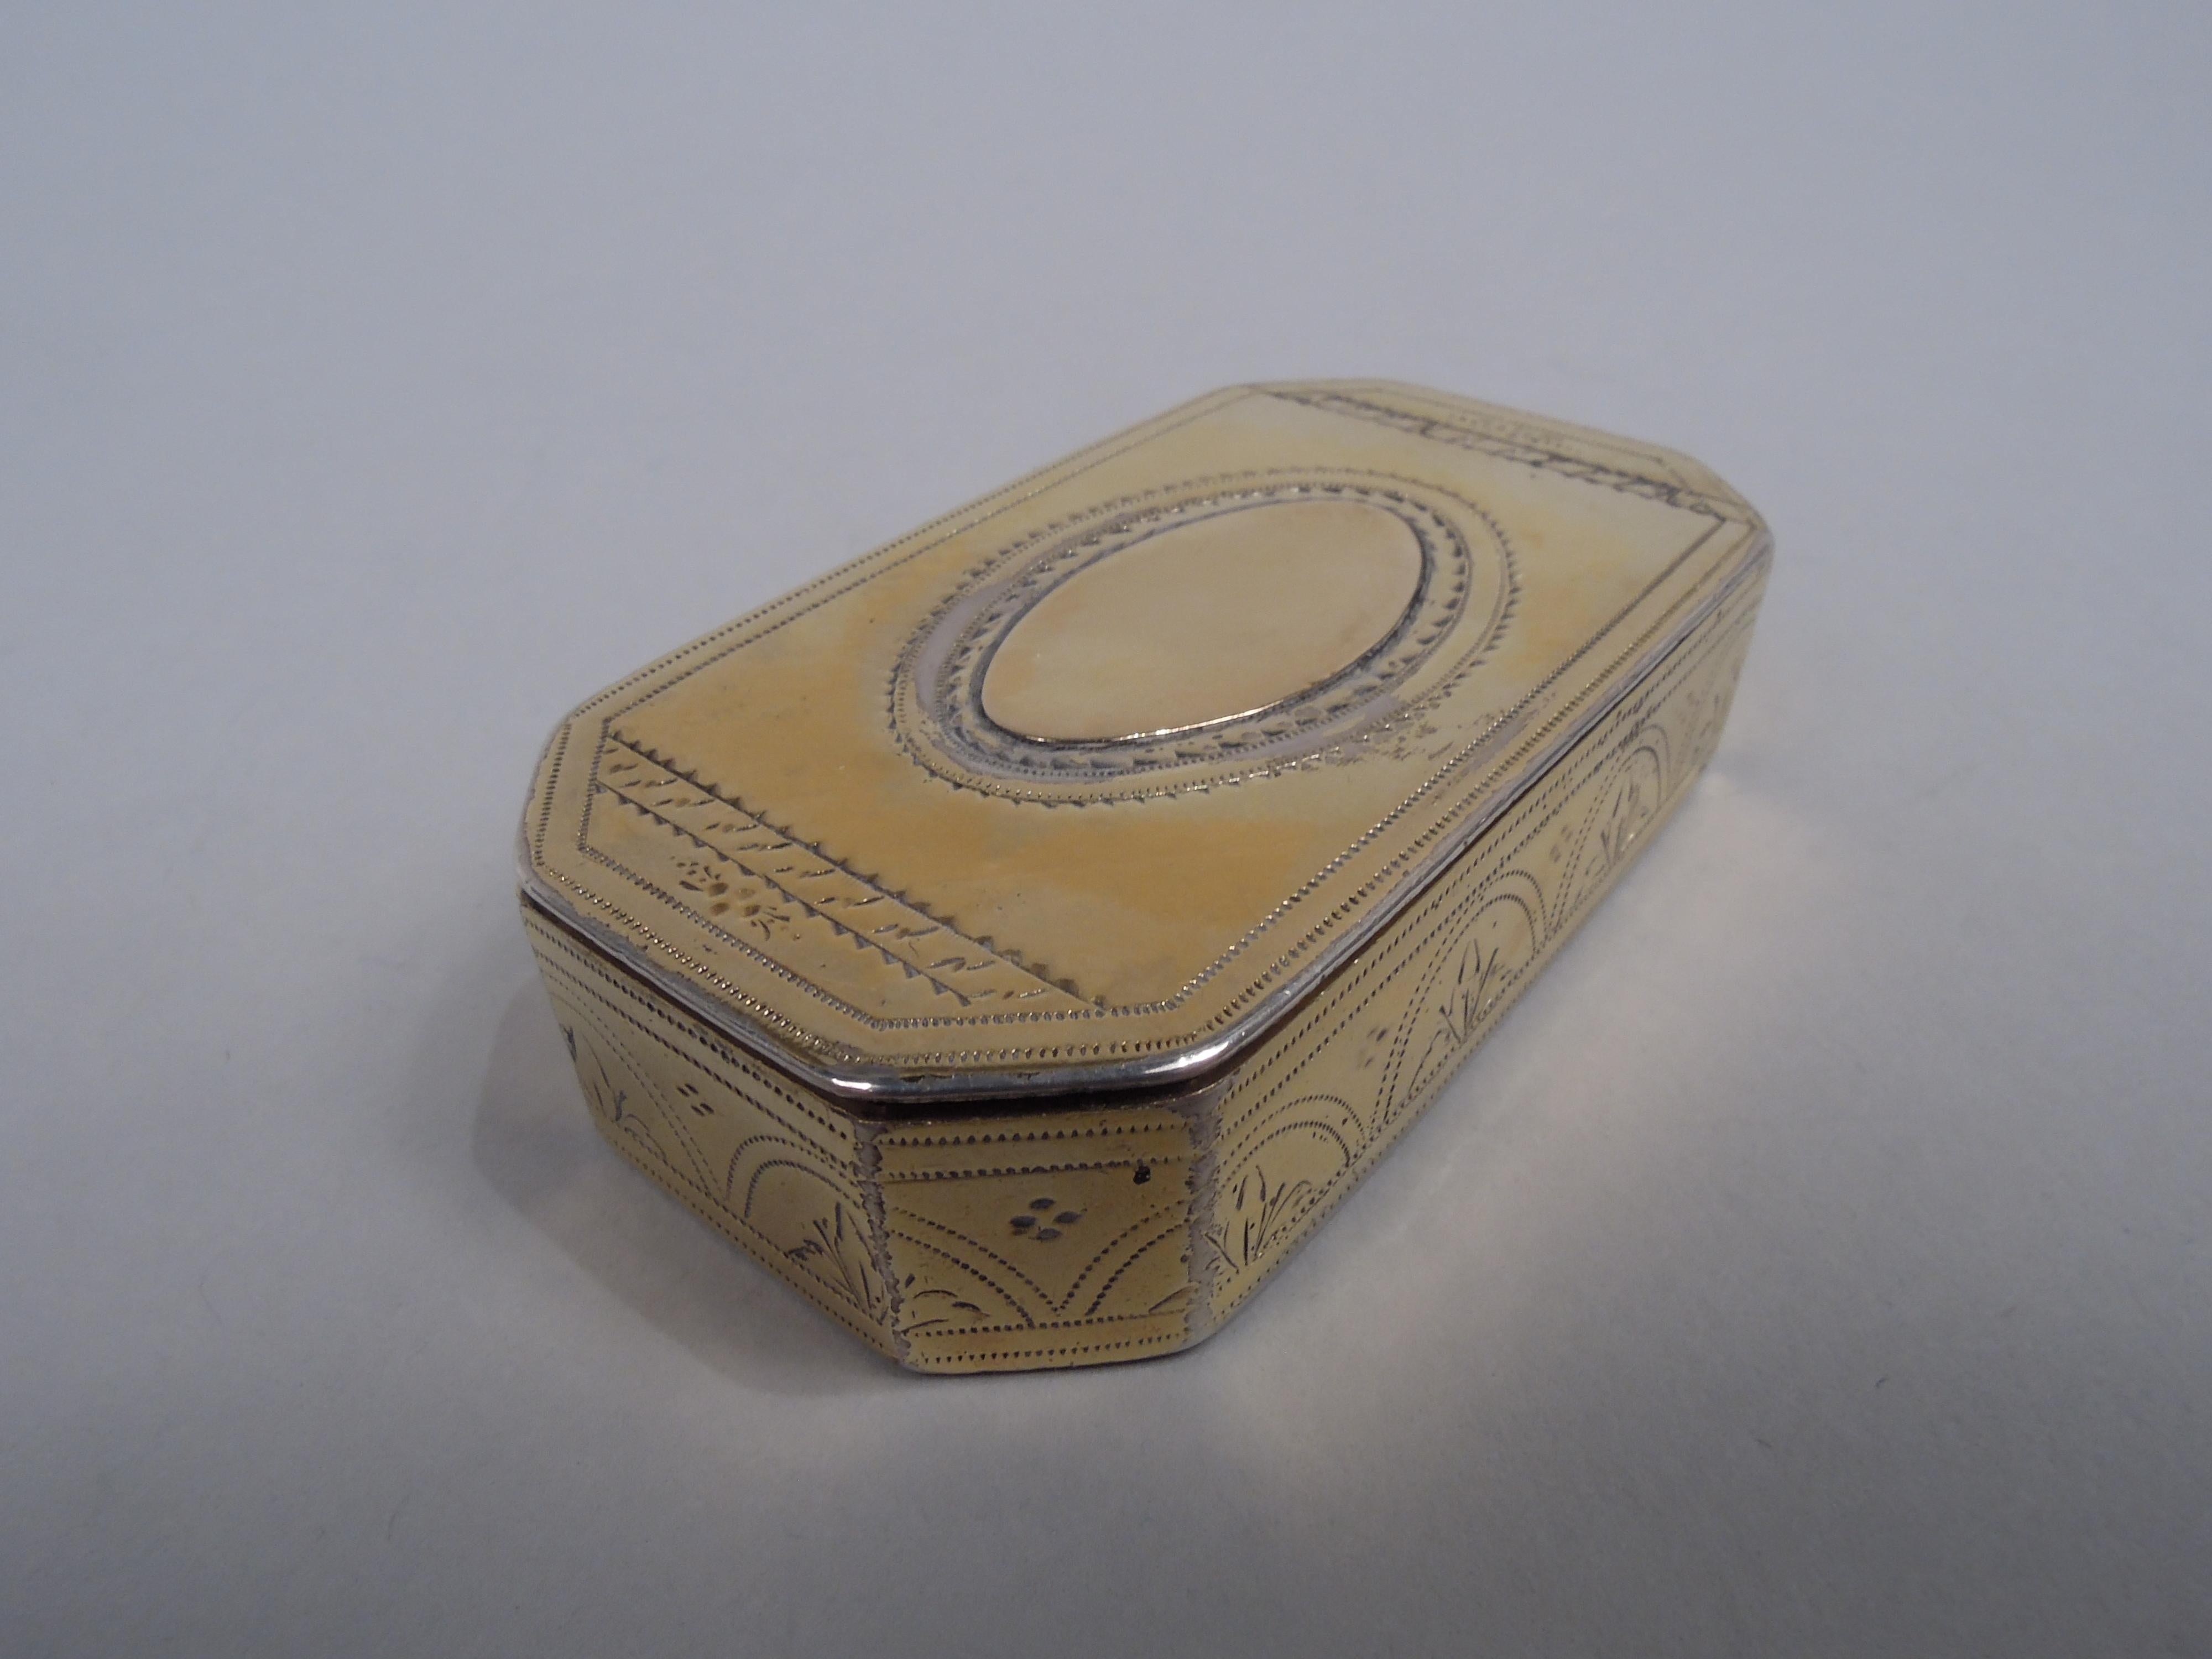 George III sterling silver snuffbox. Made by Samuel Pemberton in Birmingham in 1823. Rectangular with chamfered corners and flat hinged cover. Engraved Neoclassical ornament in pointillé borders. On sides acanthus leaf arcade. On bottom leaf in